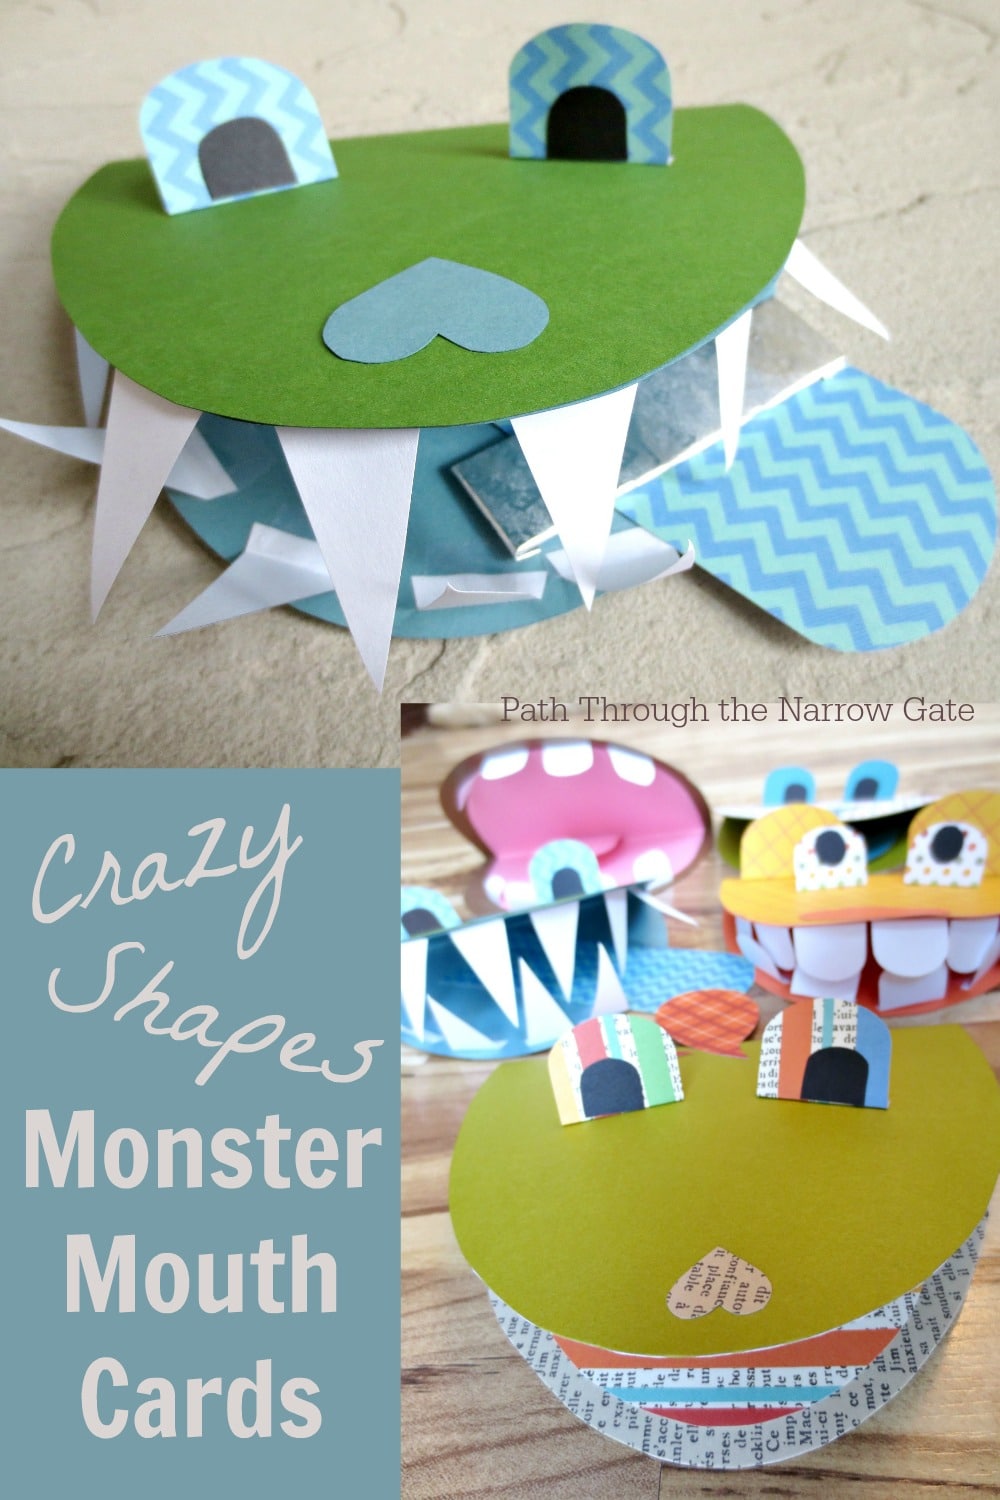 These super cute Monster Mouth Cards are a great rainy day activity and will bring a smile to the face of any recipient, old or young (if you can get them away from their creators - better make two!)